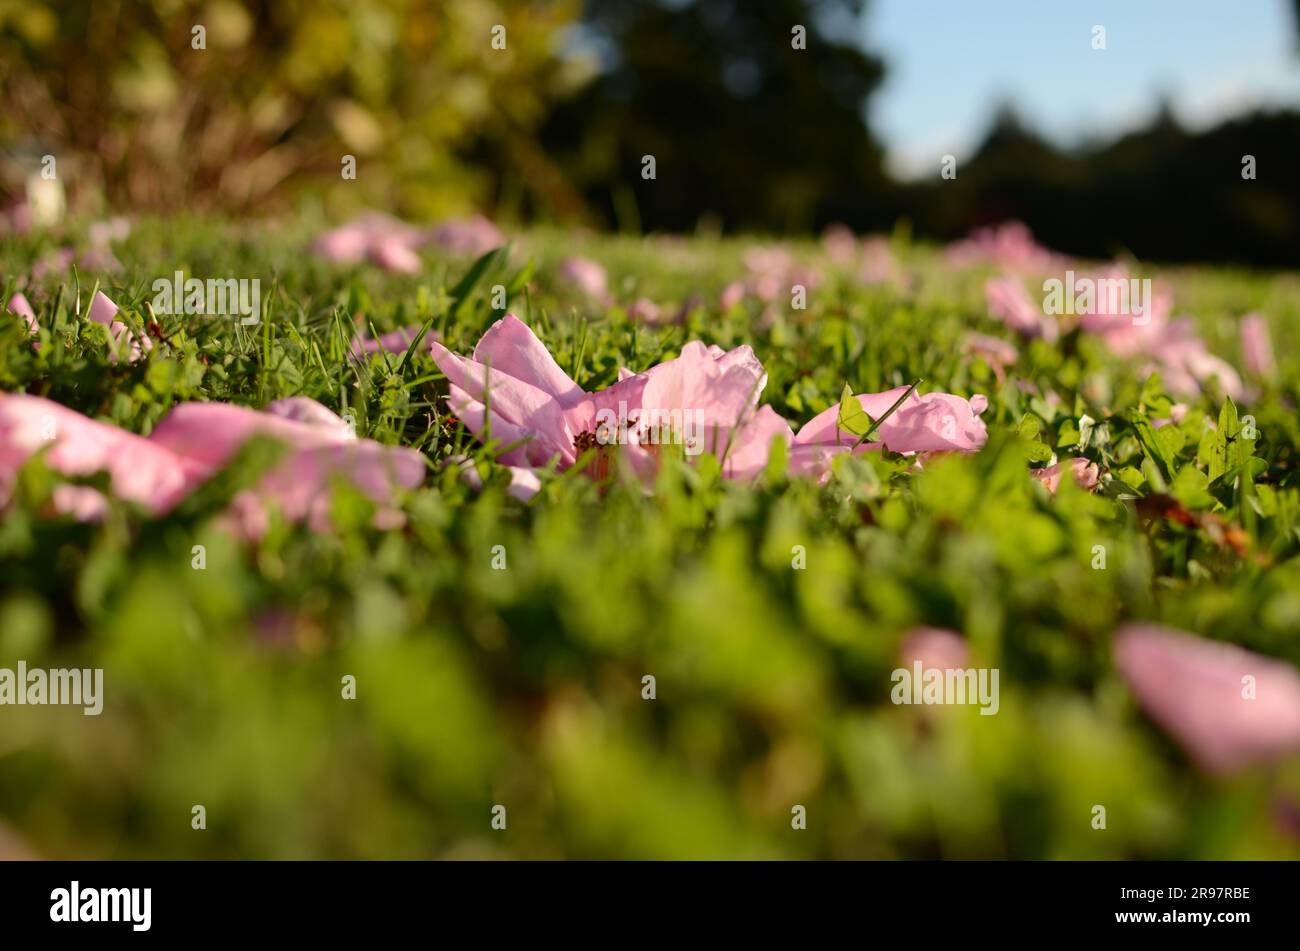 Pink Camellia Flowers On Lawn. Stock Photo